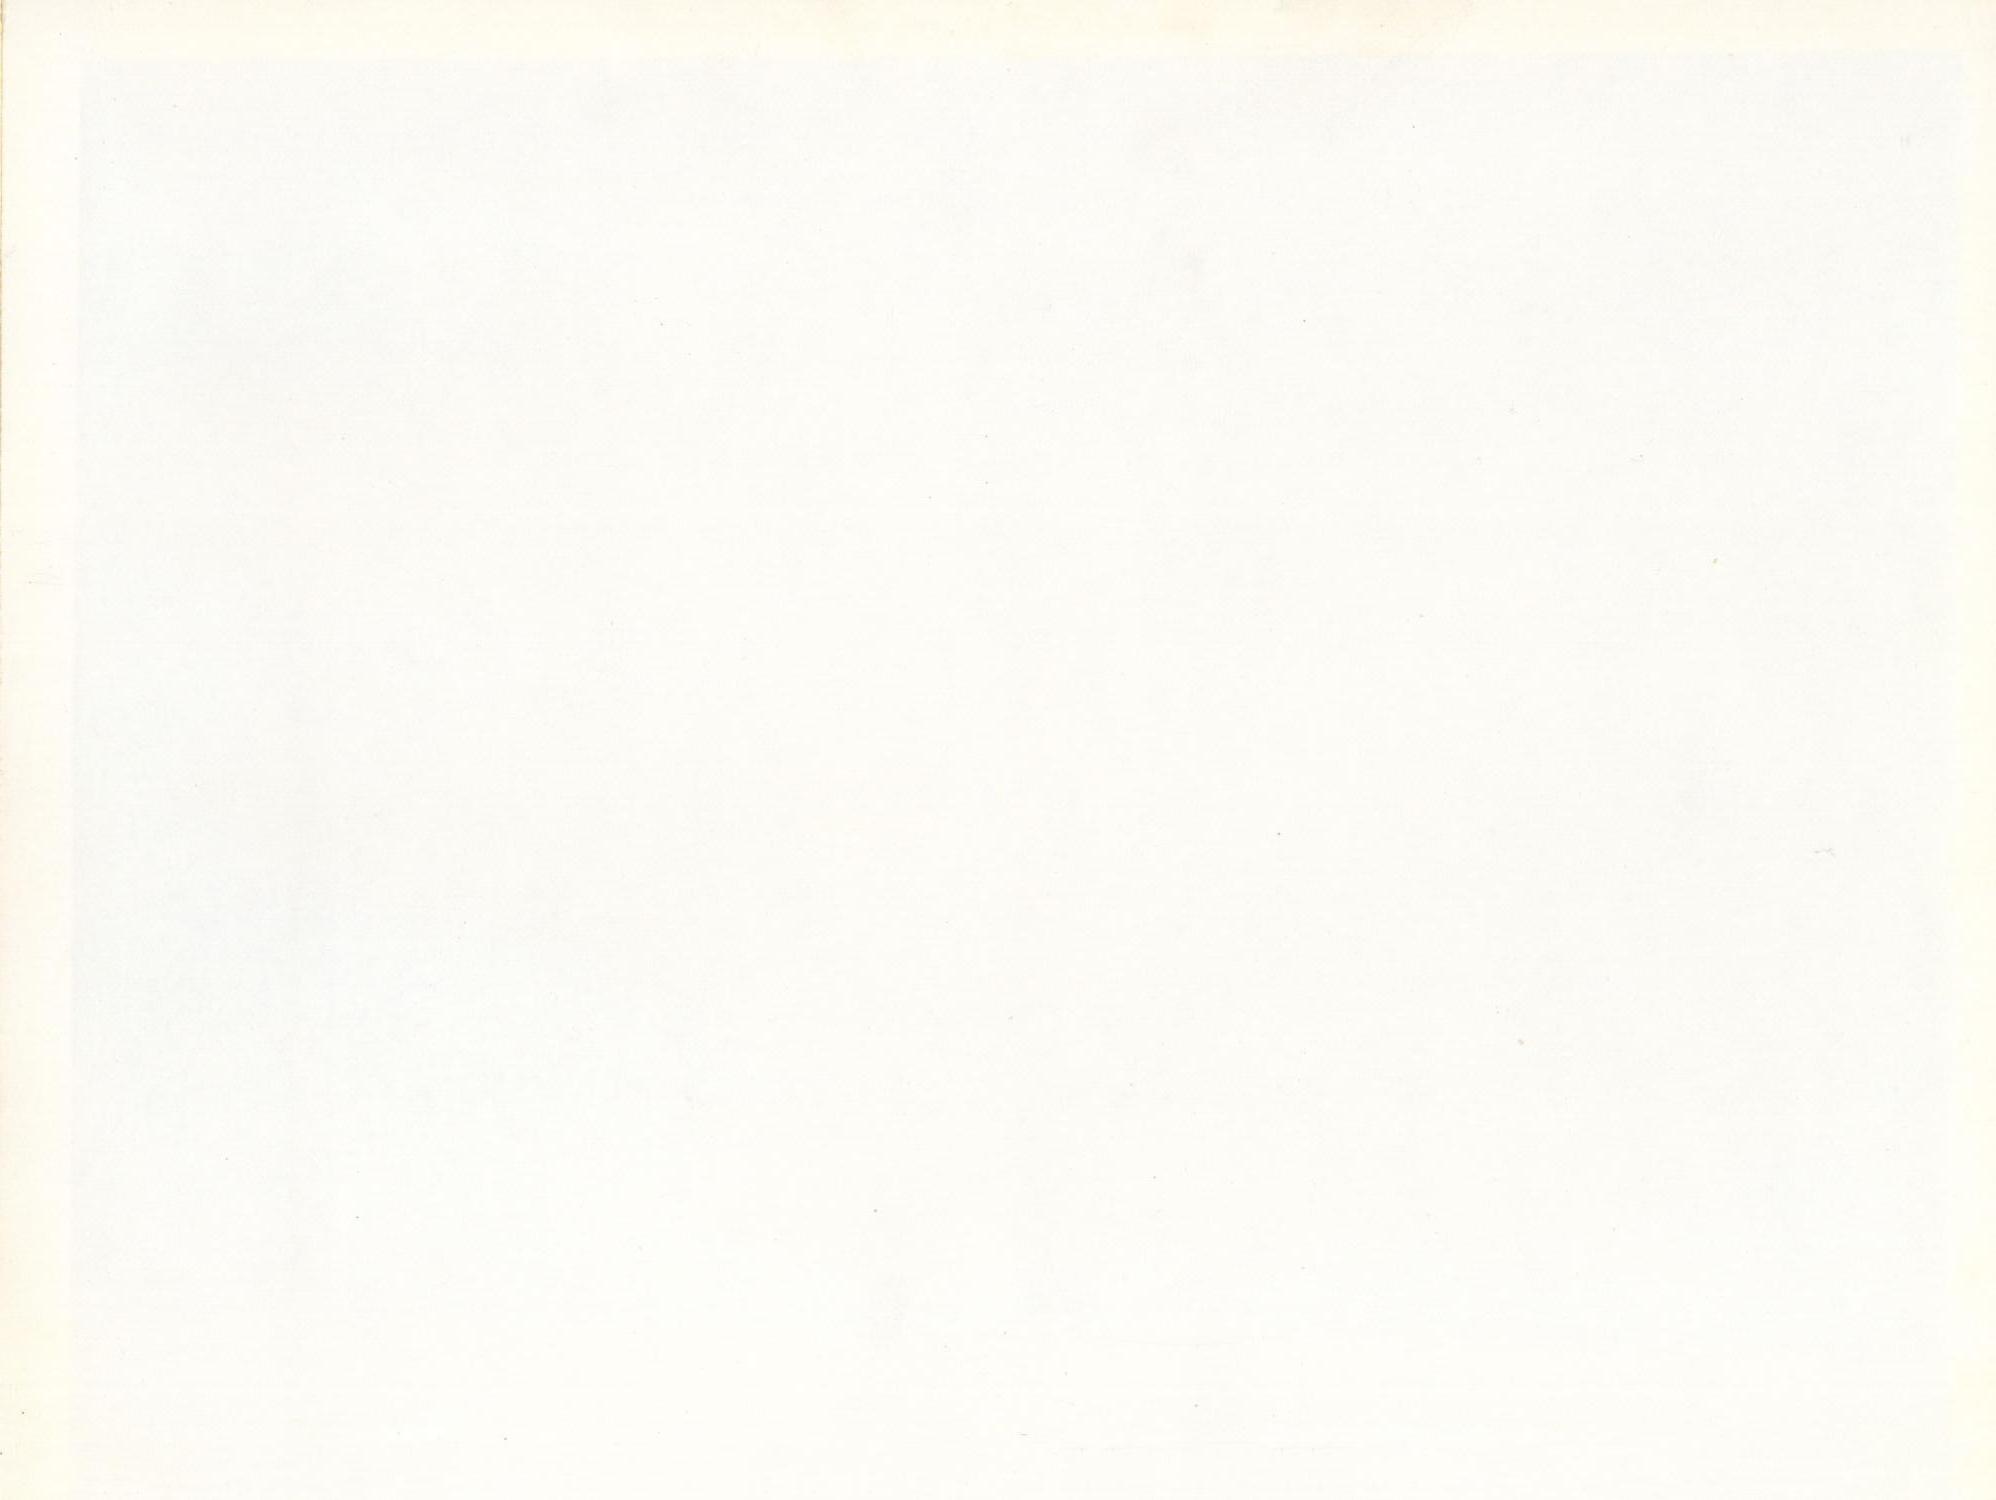 The Grassburr, Yearbook of Tarleton State College, 1958
                                                
                                                    Front Inside
                                                